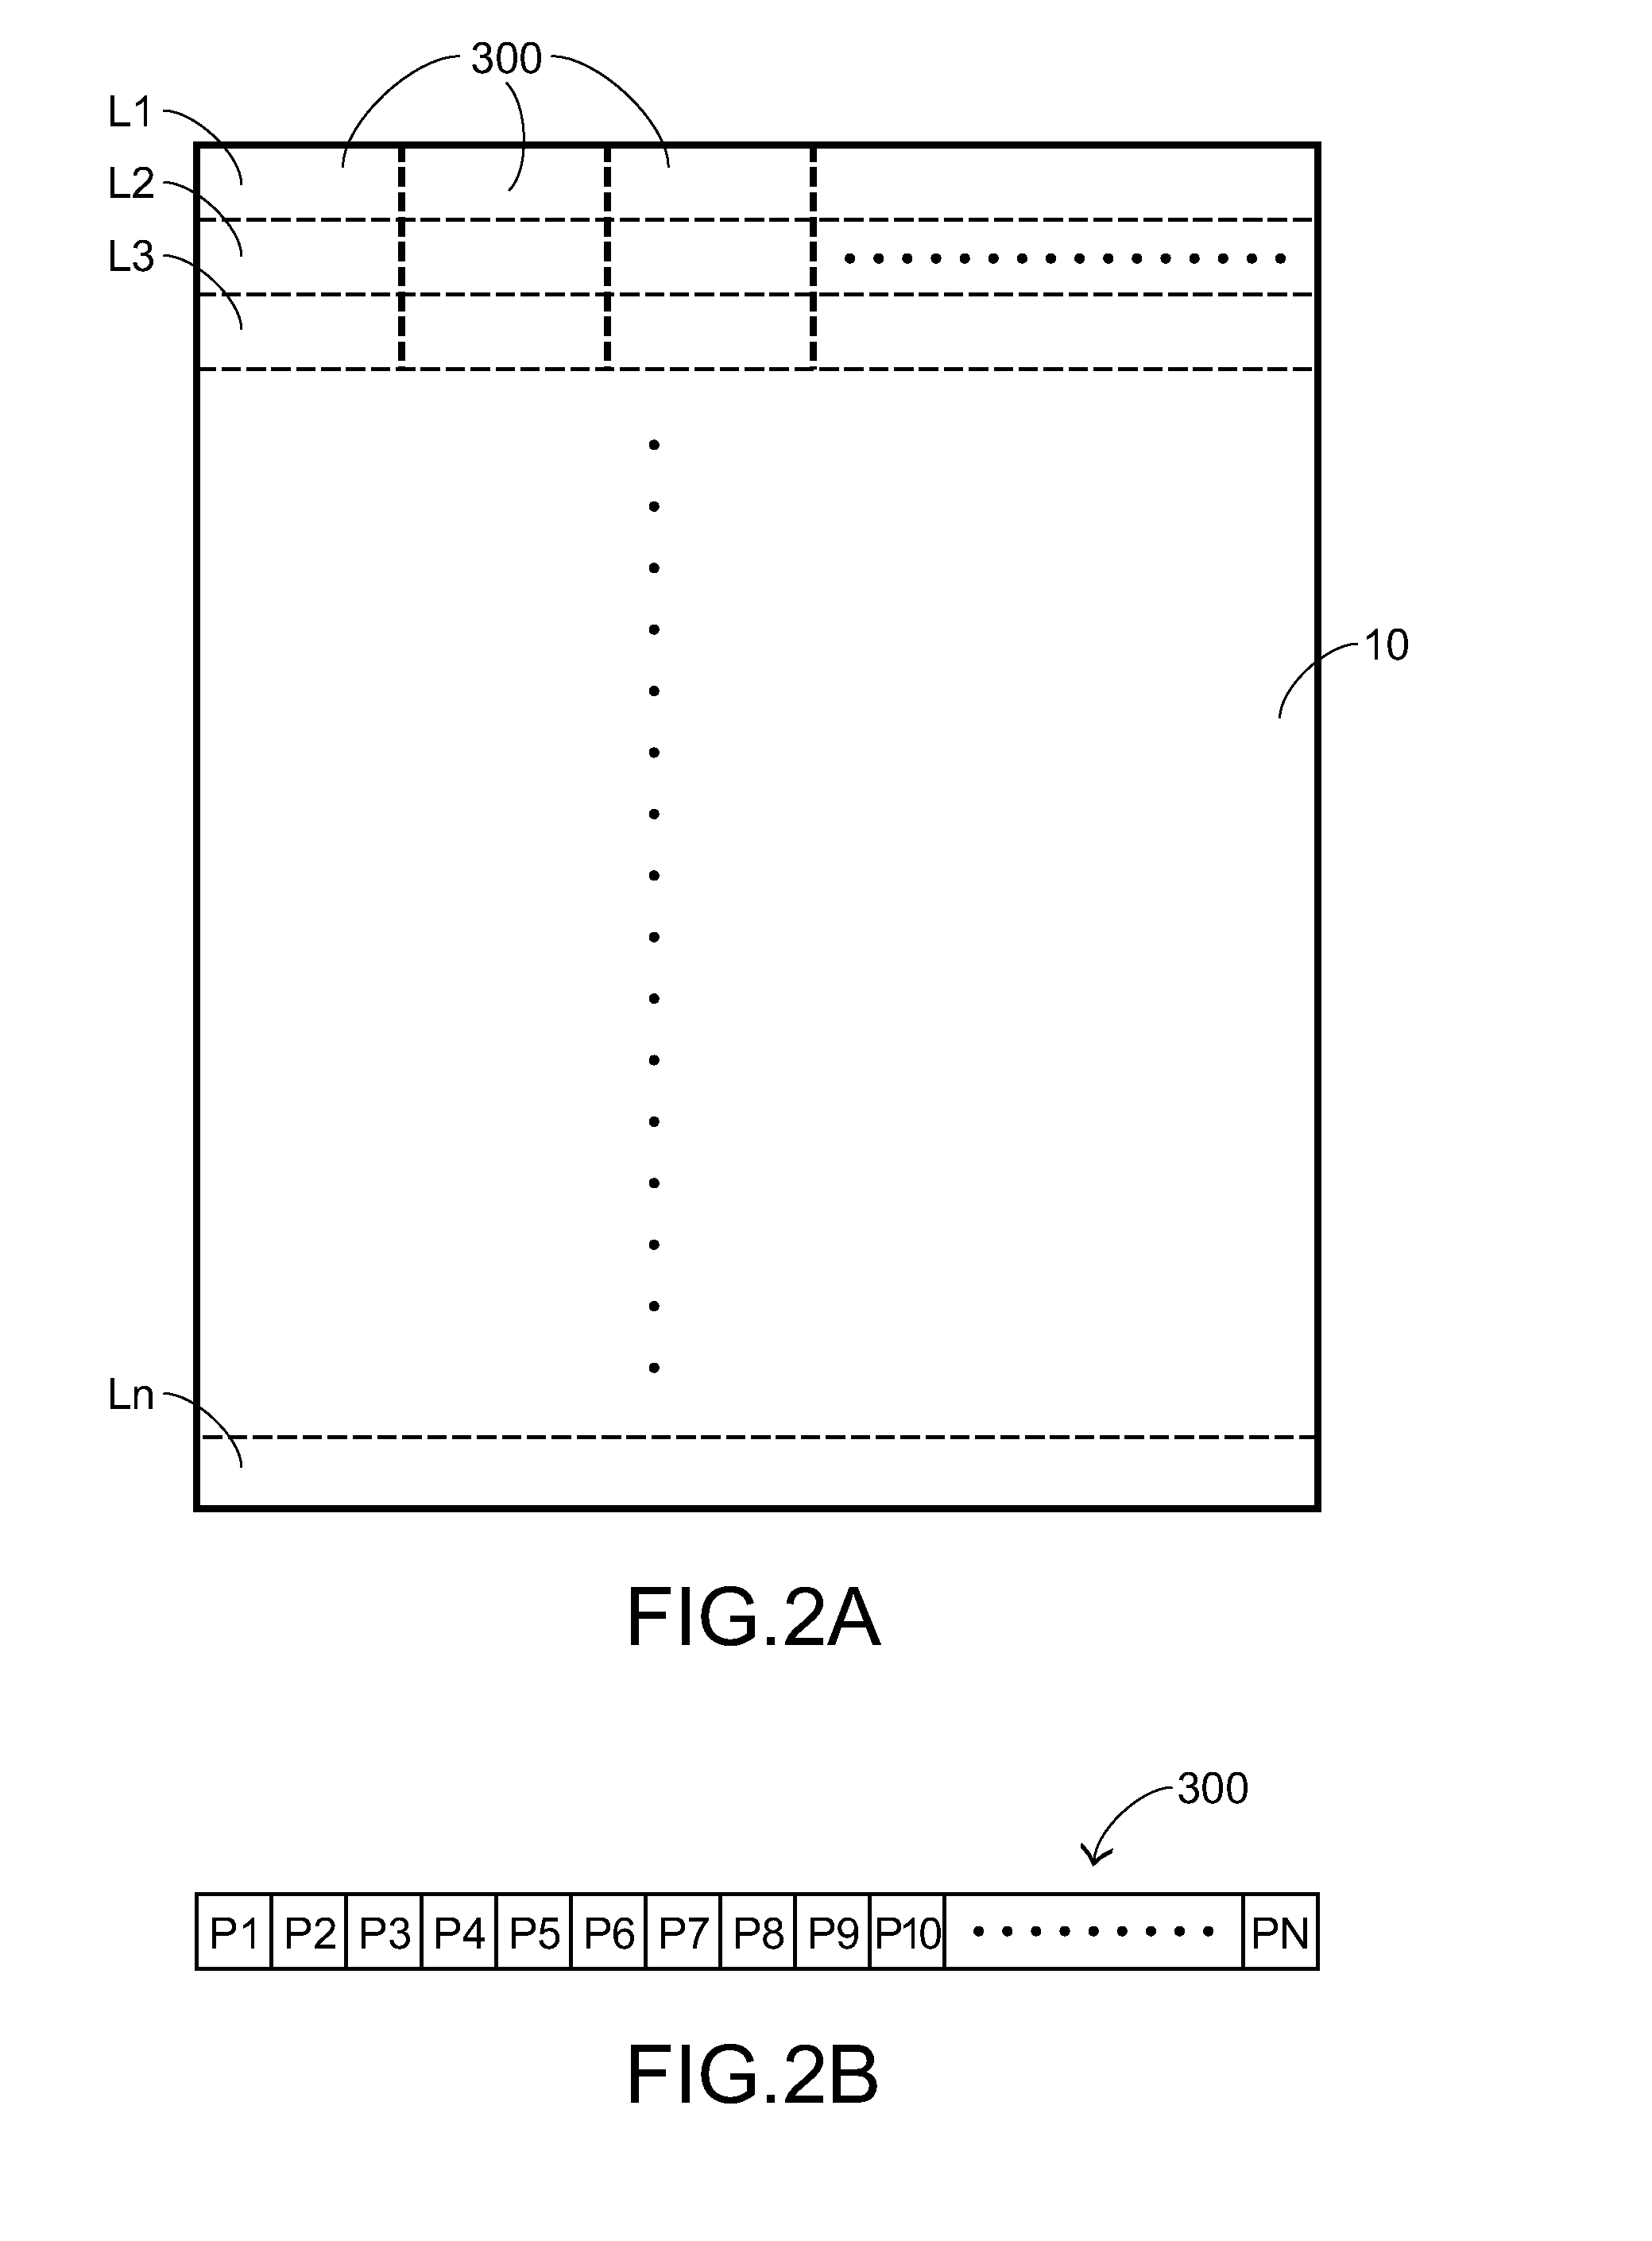 Text and graphic separation method and text enhancement method